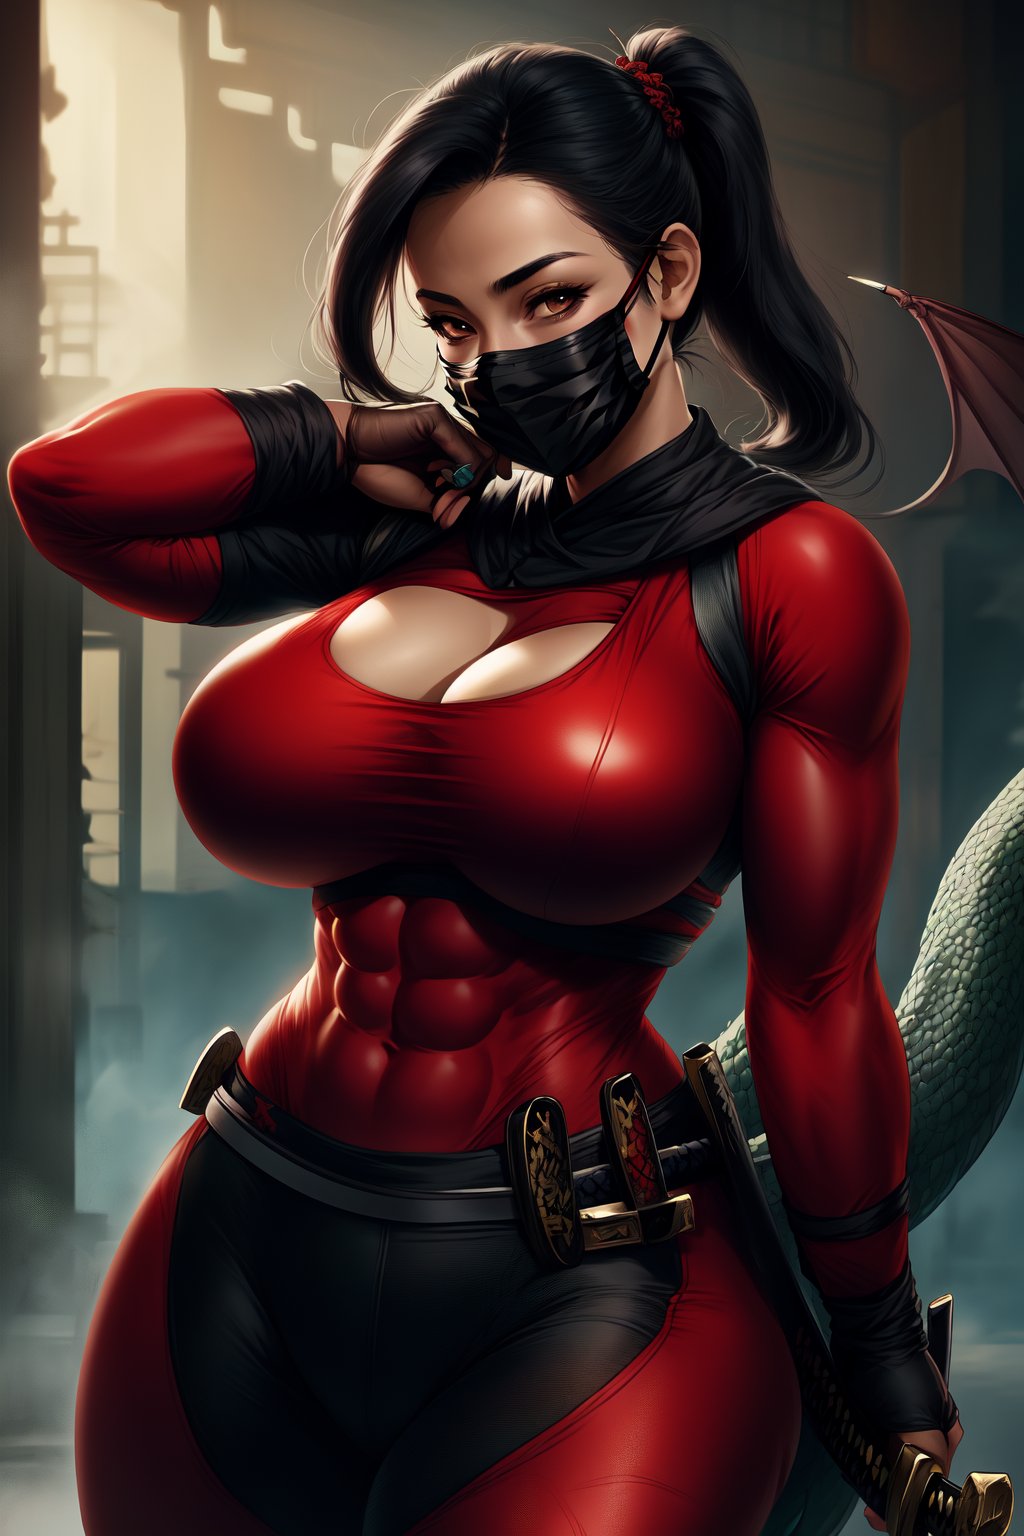 pony_tail, ,big_breasts,black_hair, body, abs, ,sexy,woman,tigh,protruding, sexy red body suit, high_resolution,katana, mouth mask,dragon big thigh 